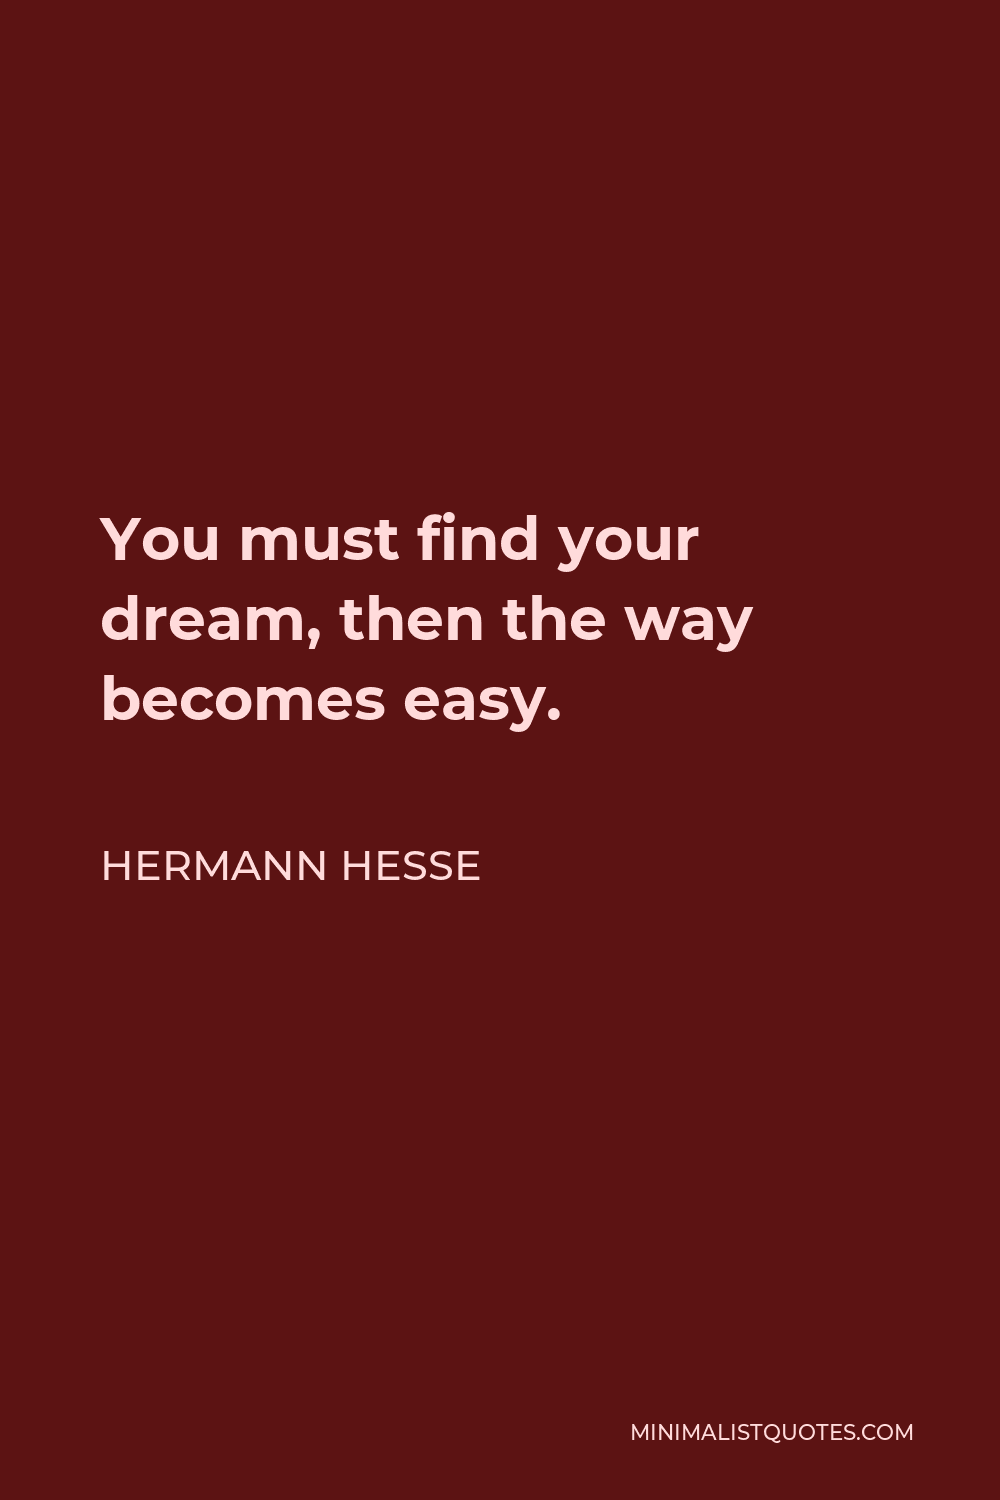 Hermann Hesse Quote - You must find your dream, then the way becomes easy.